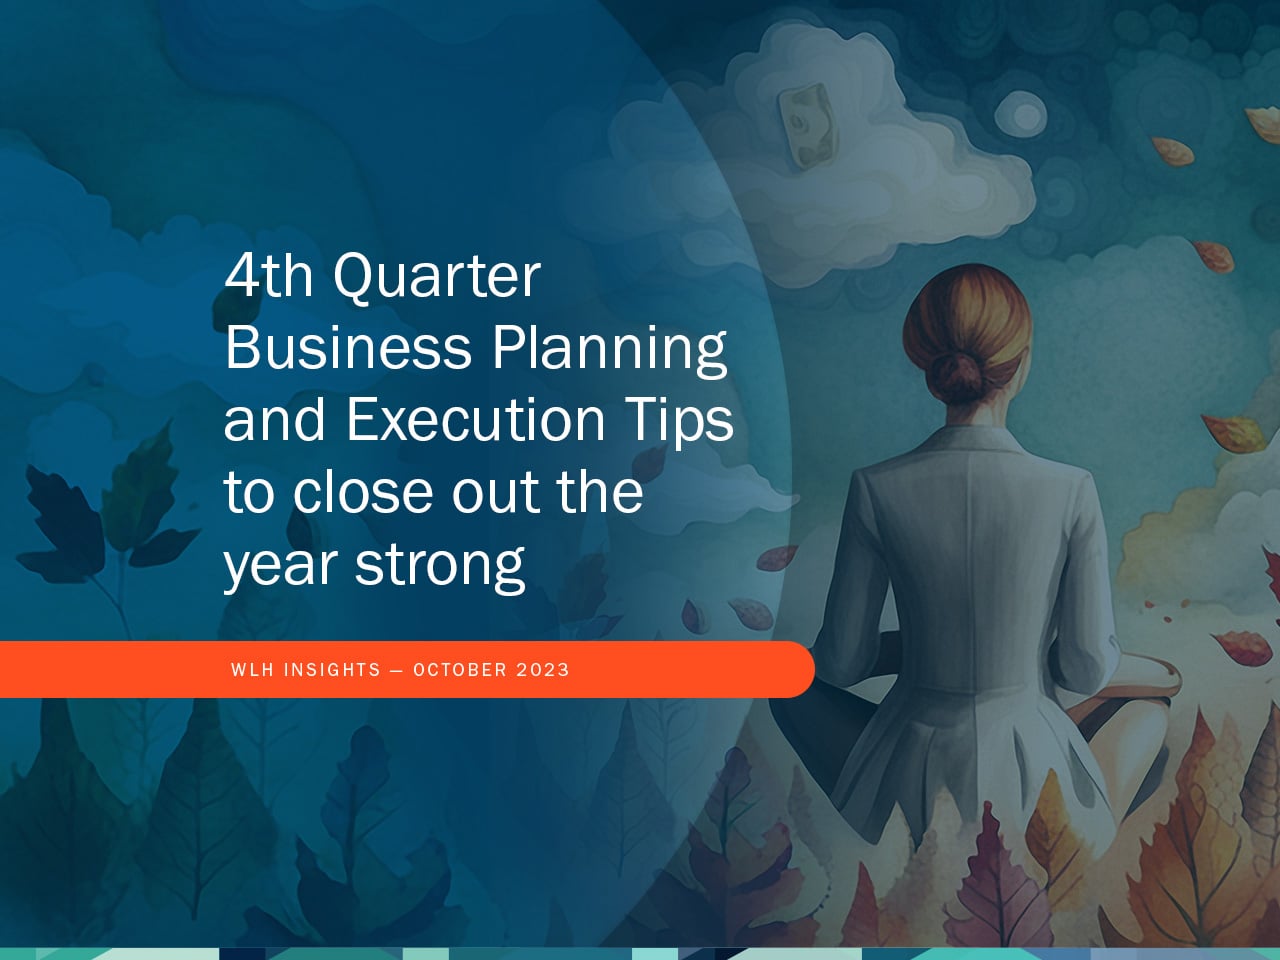 4th Quarter Business Planning and Execution Tips